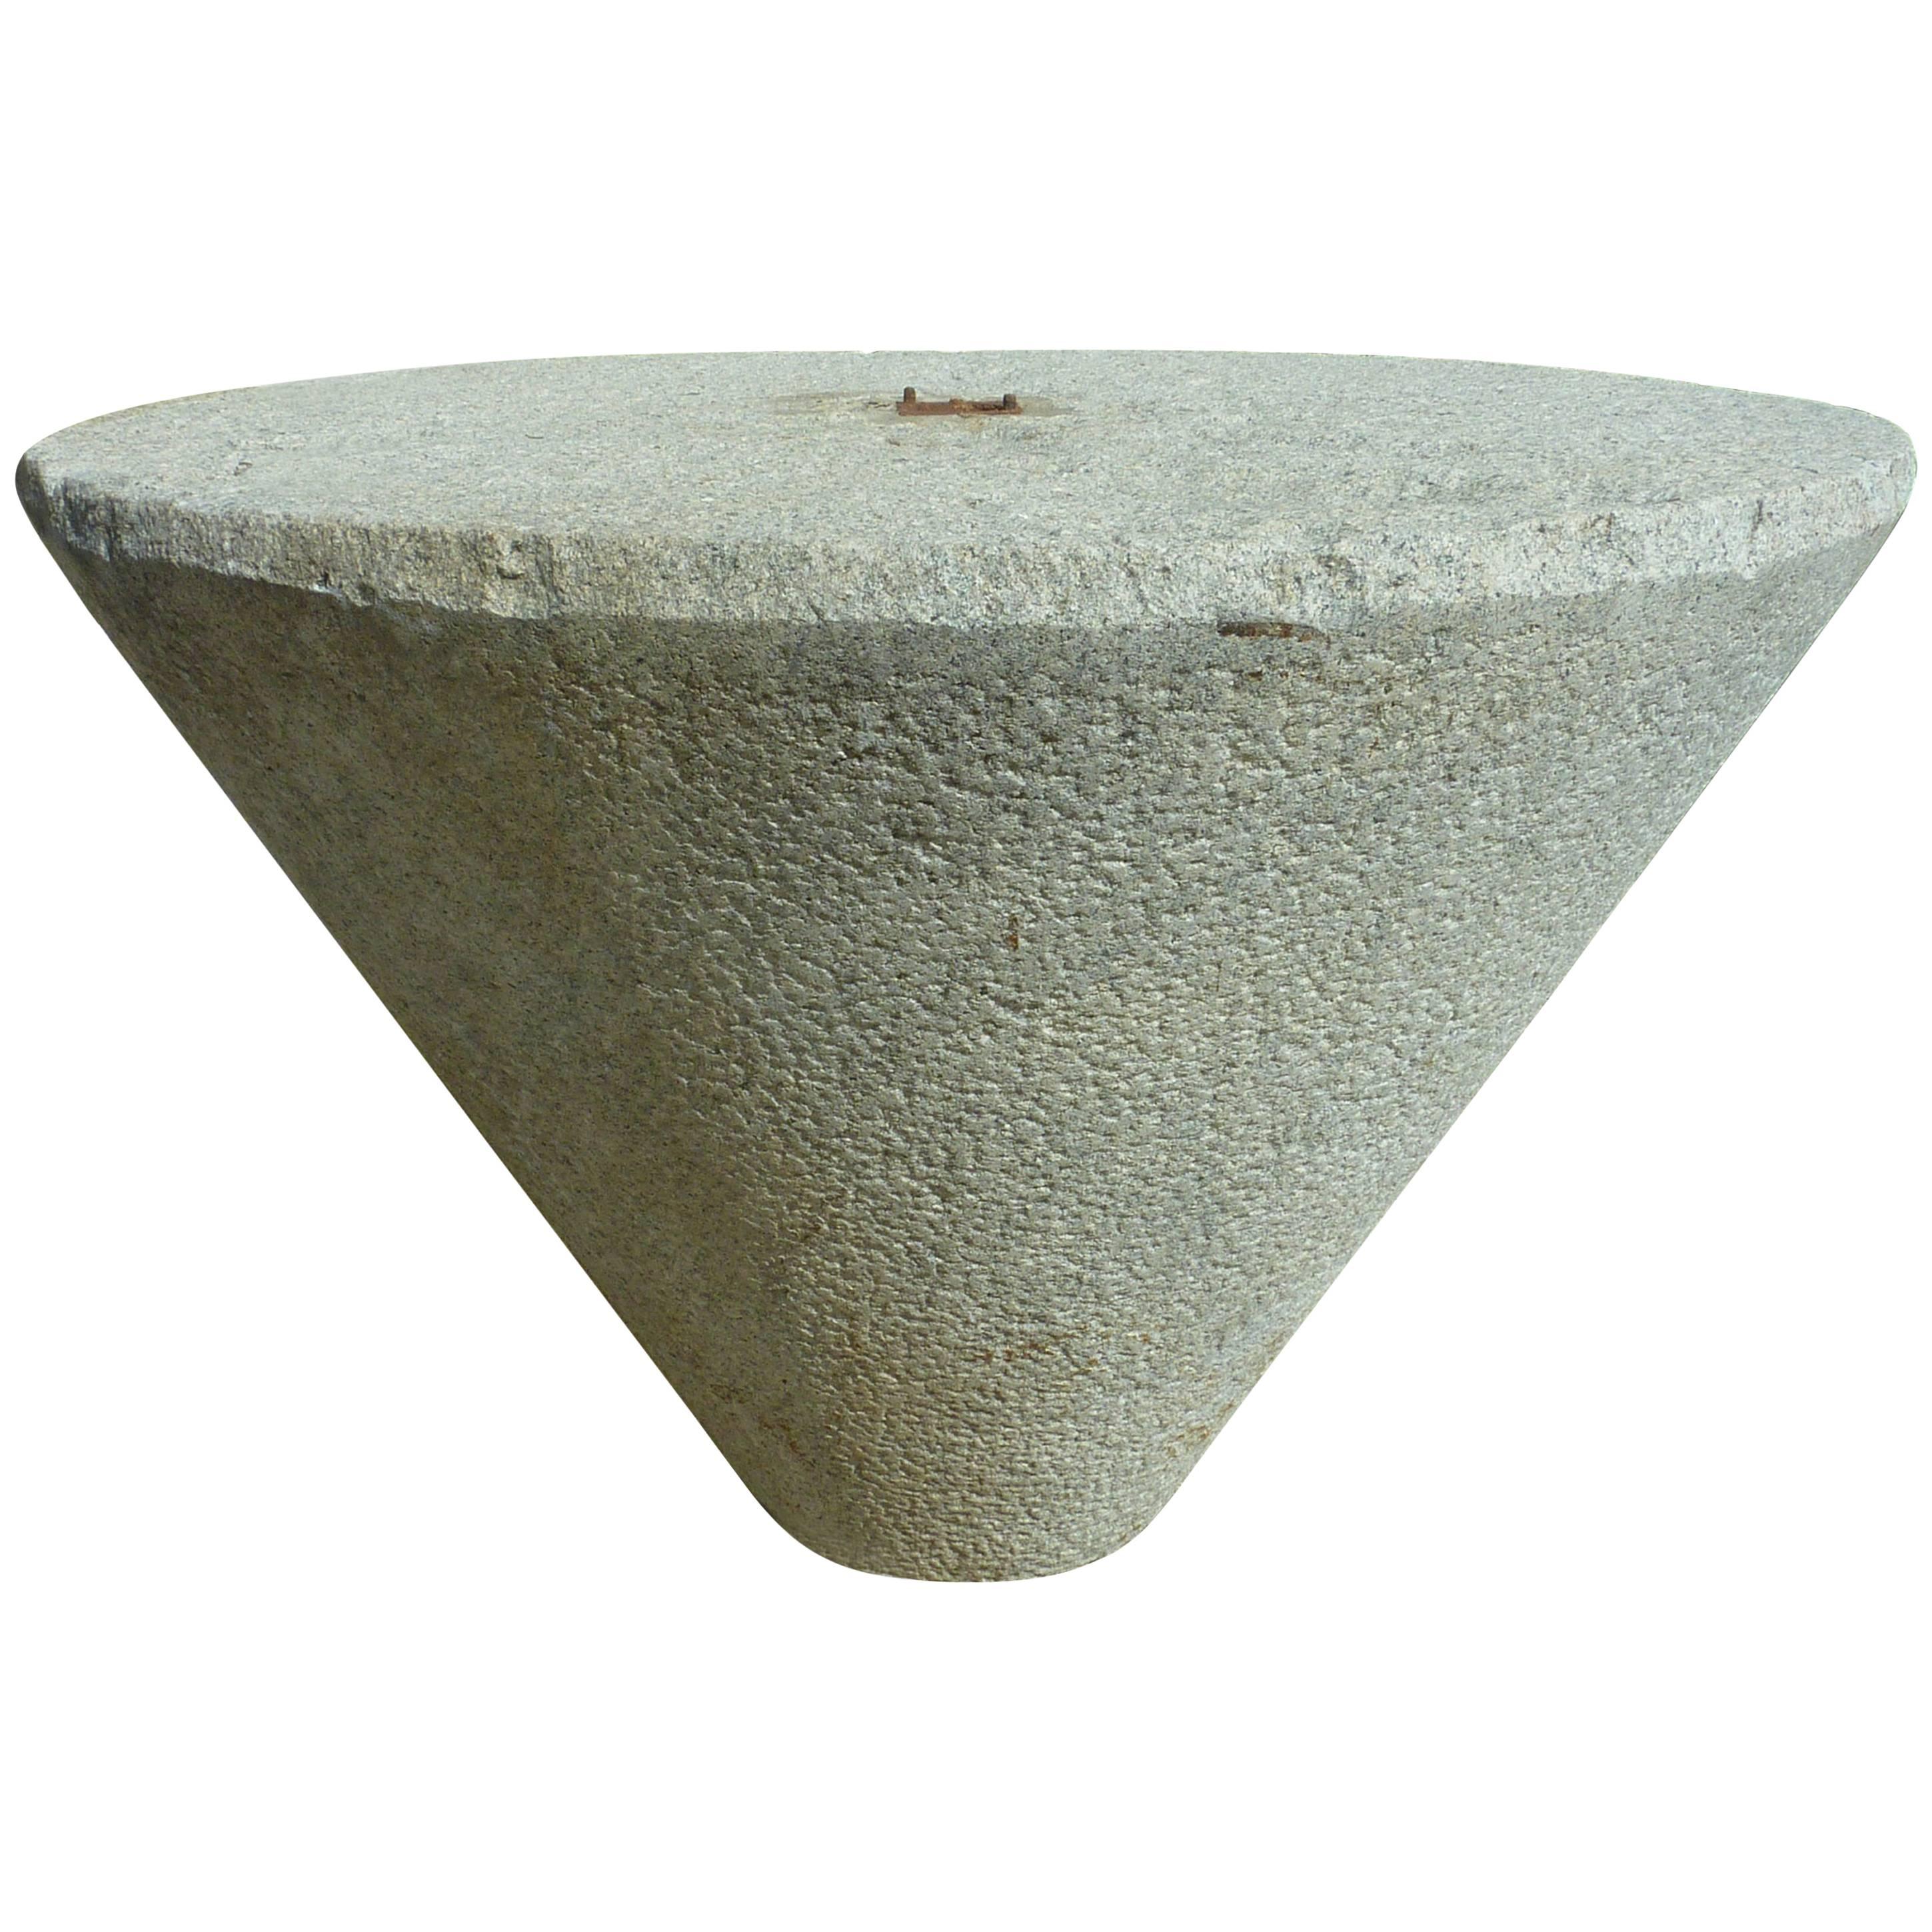 Massive High Round Table in Aged and Patined Granite Stone For Sale